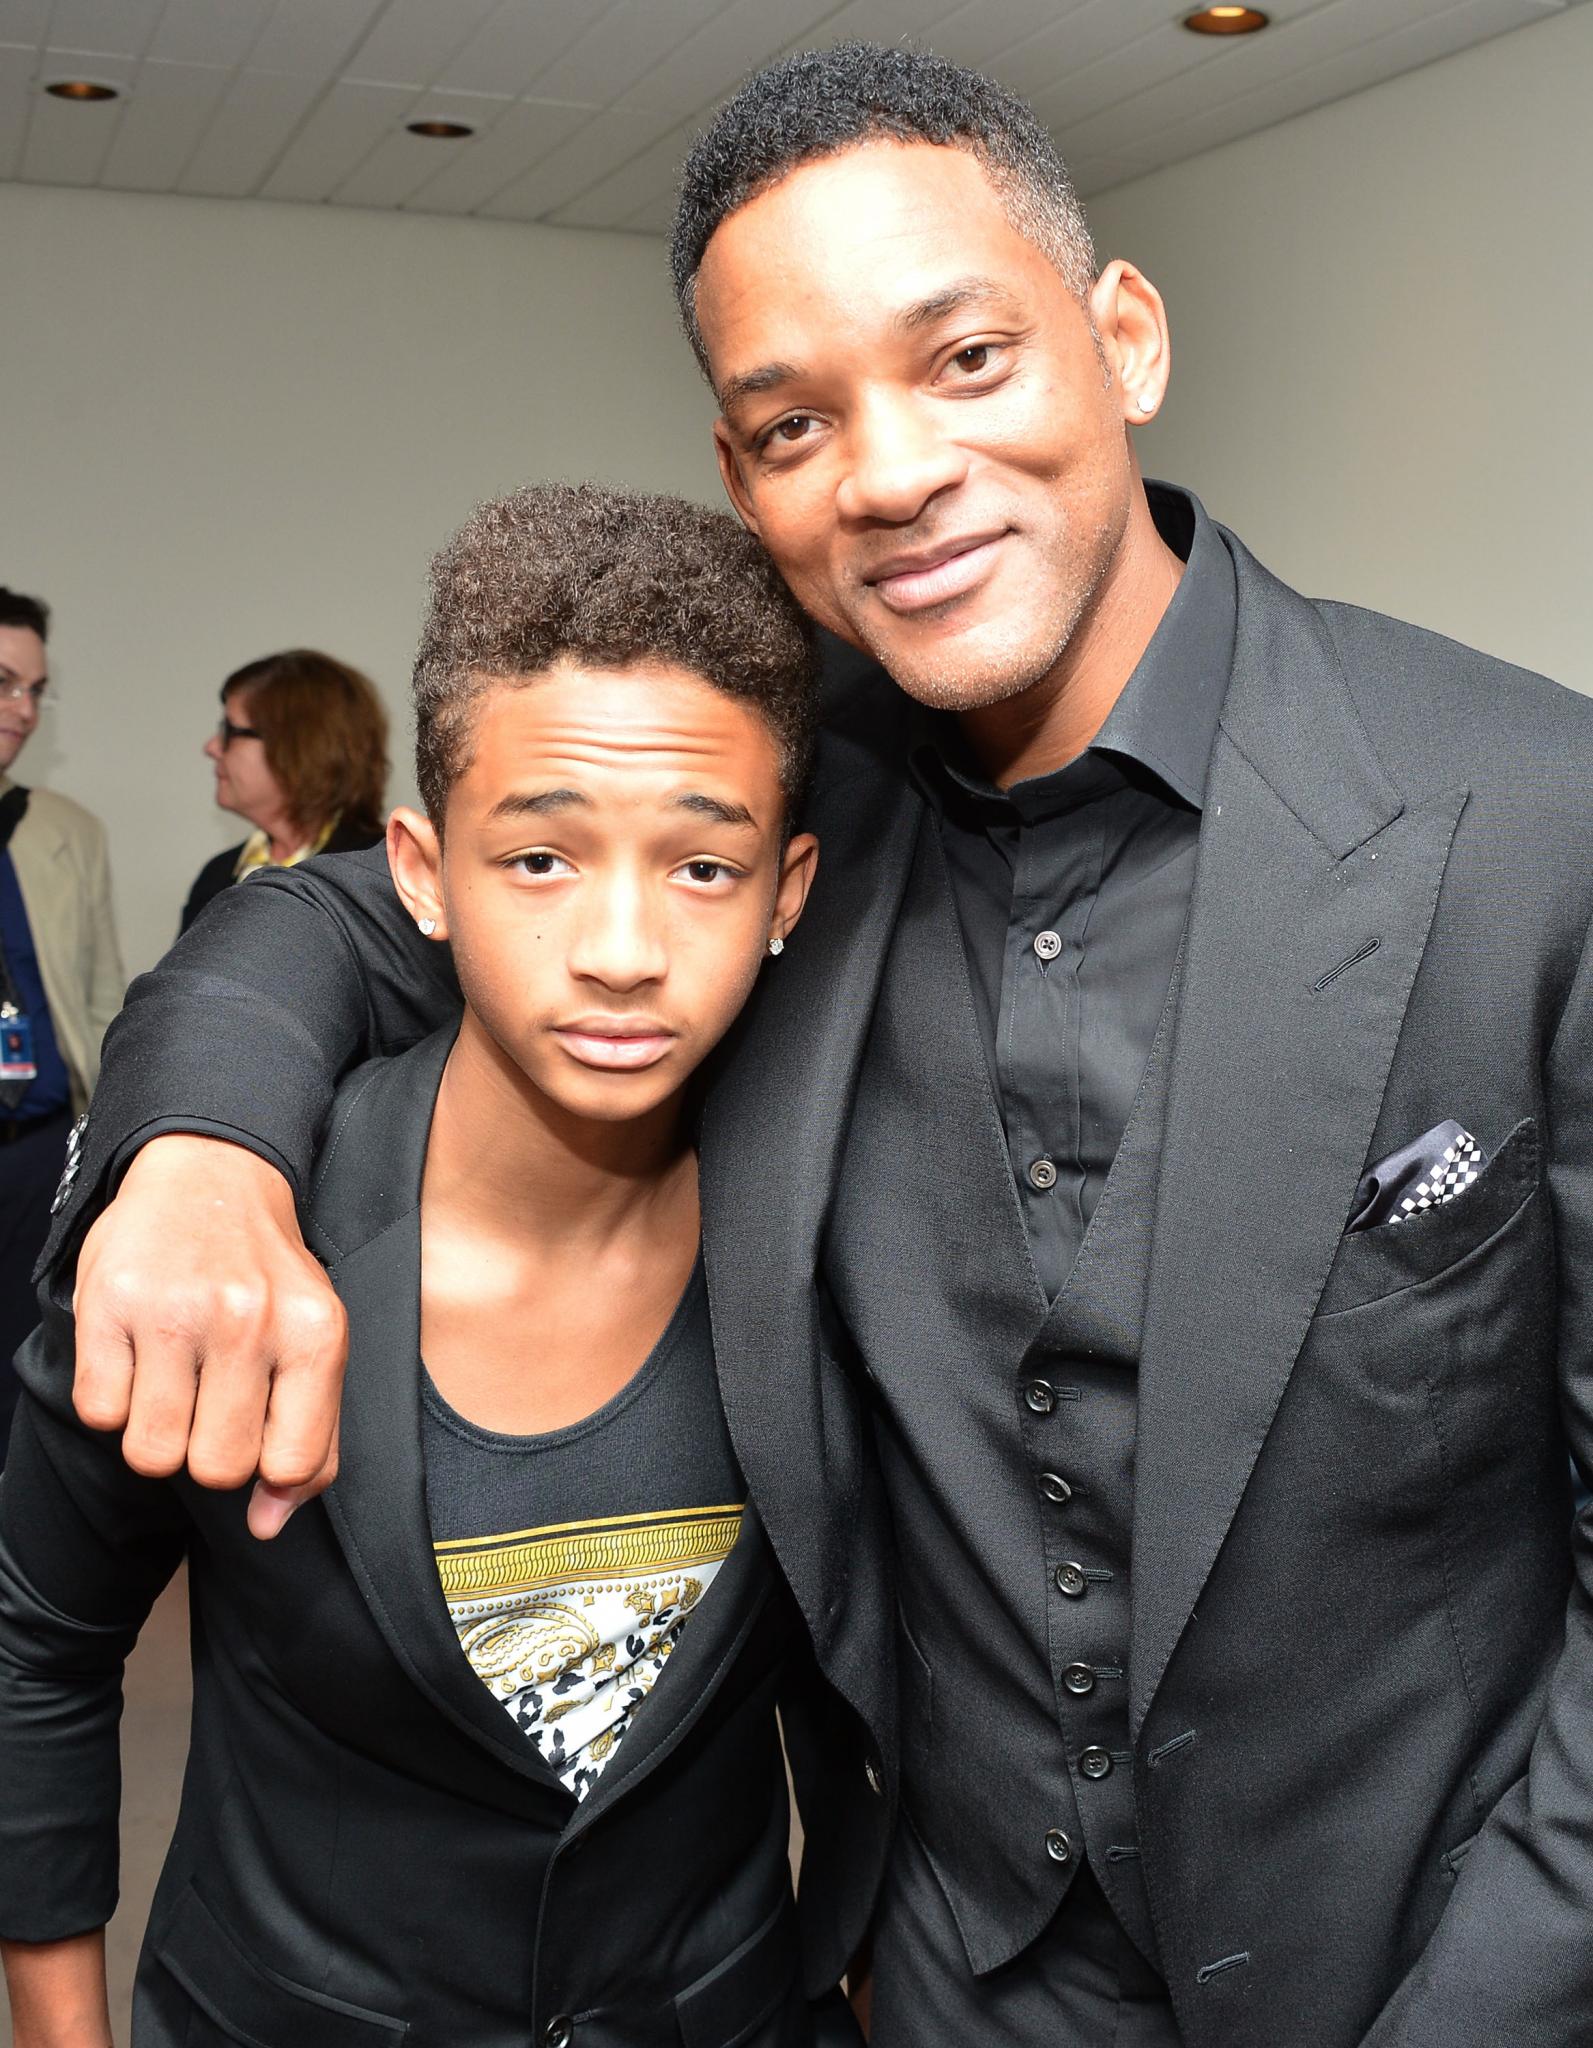 Will Smith Says He Didn't Push Kids Into Show Business
